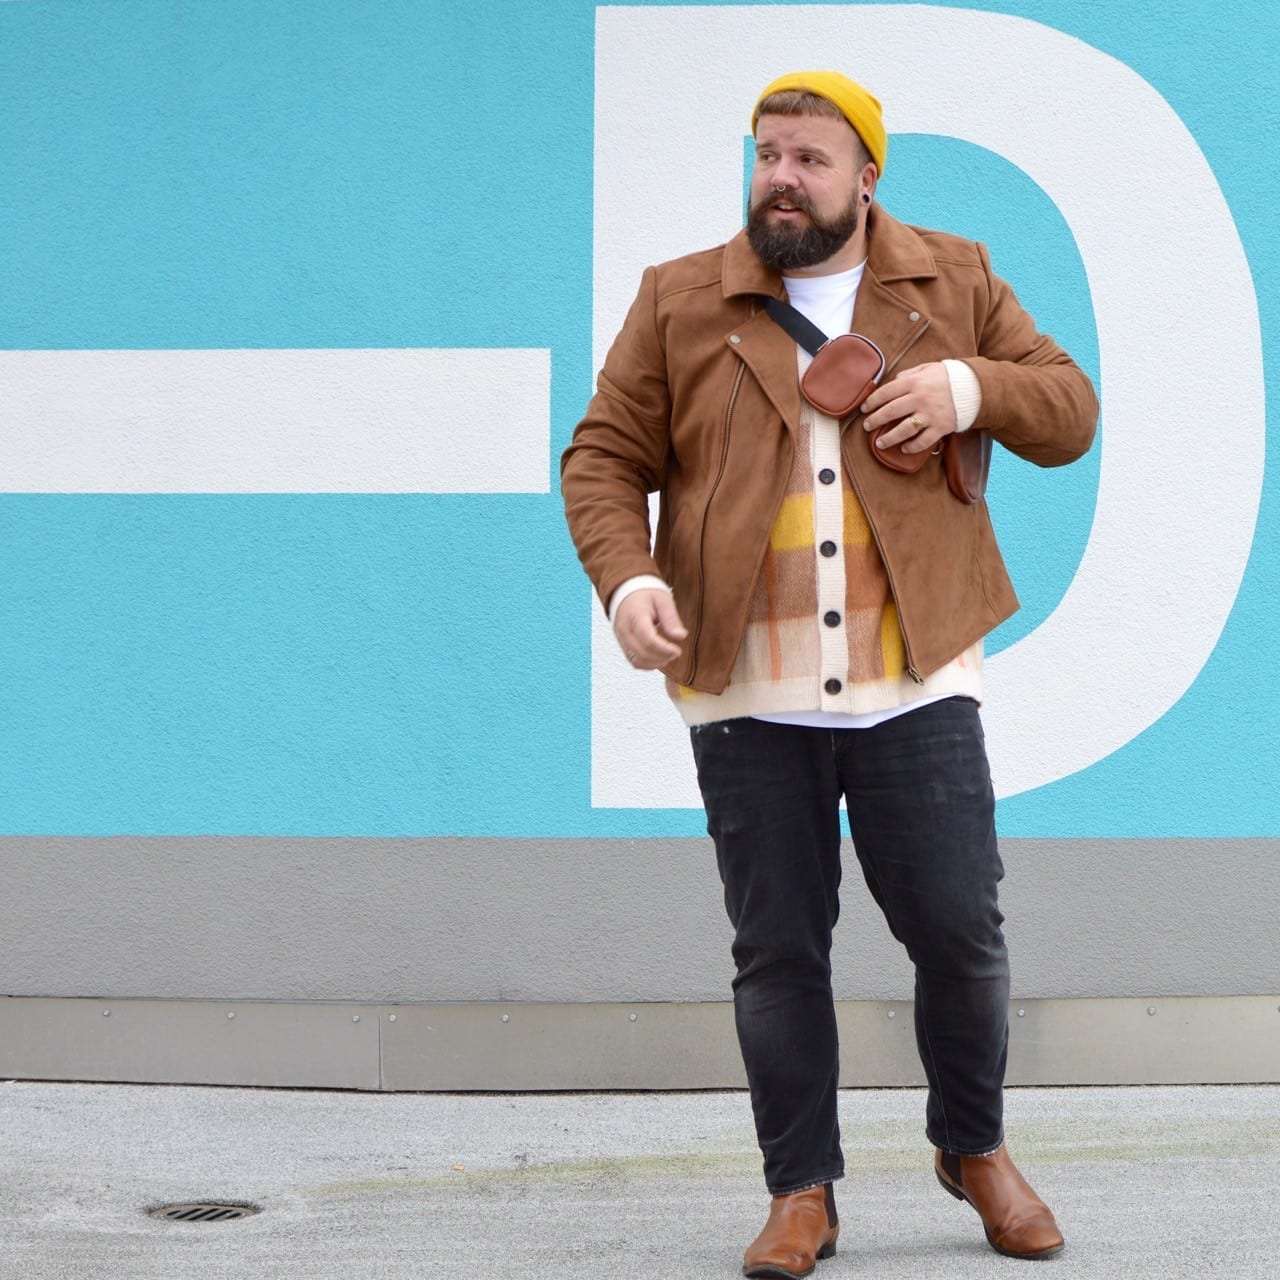 Outfits for Plus Size Guys–26 Best Styles & Tips for Big Men